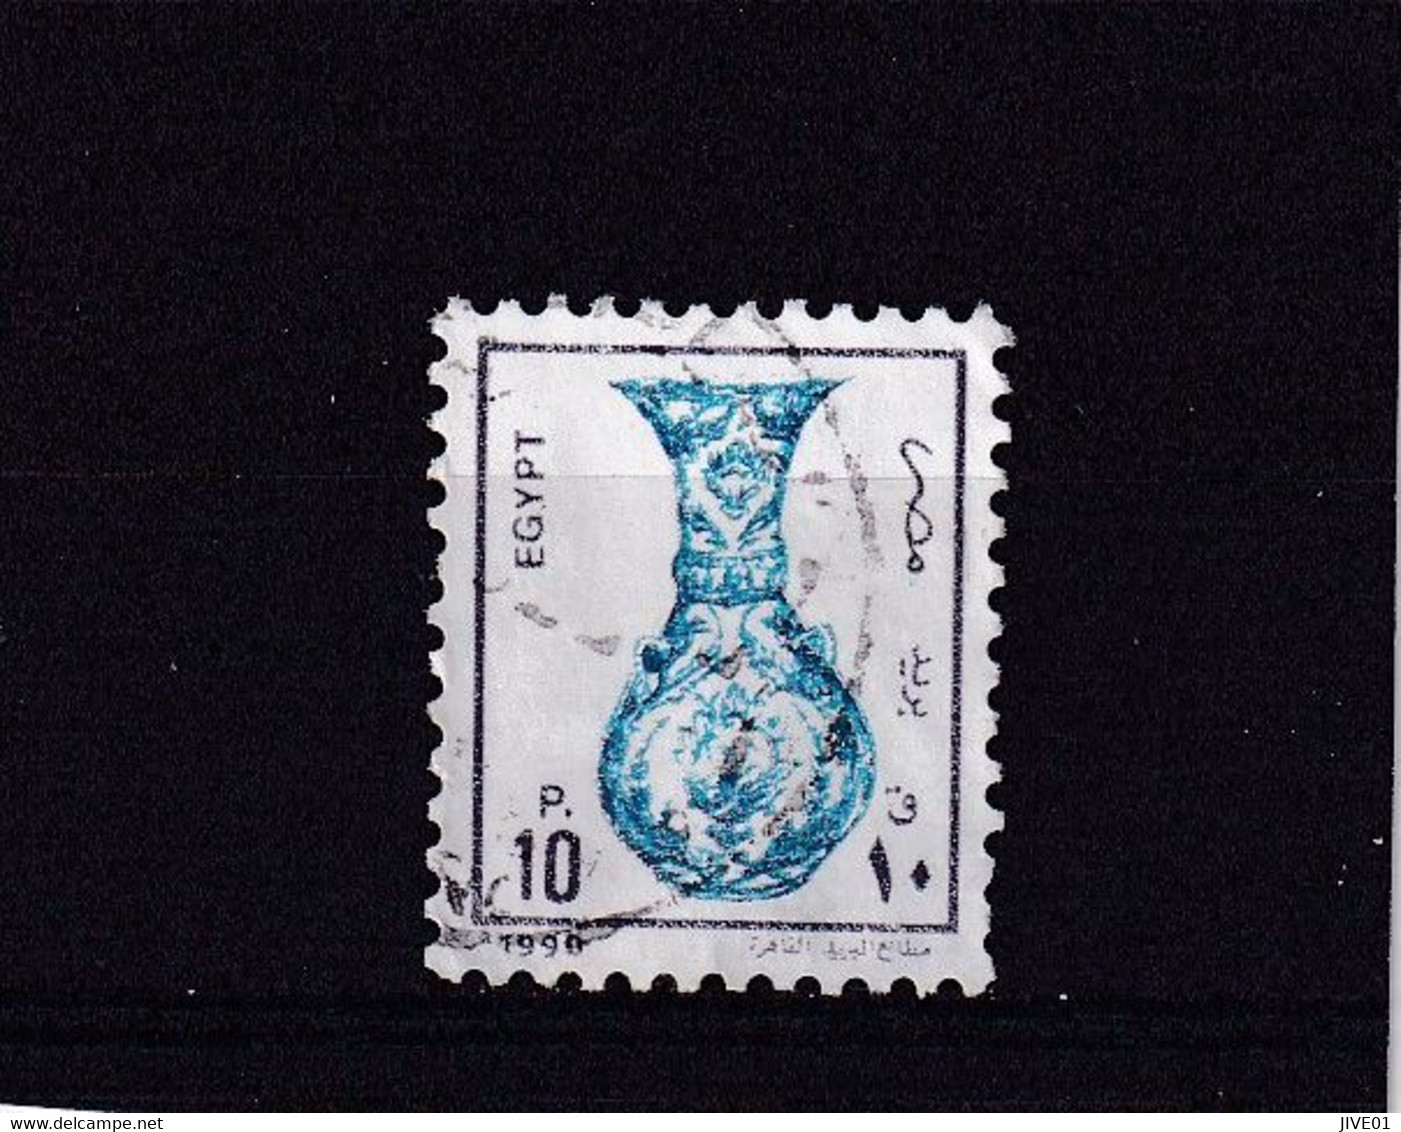 EGYPTE 1989 : Y/T  N° 1379  OBLIT. - Used Stamps